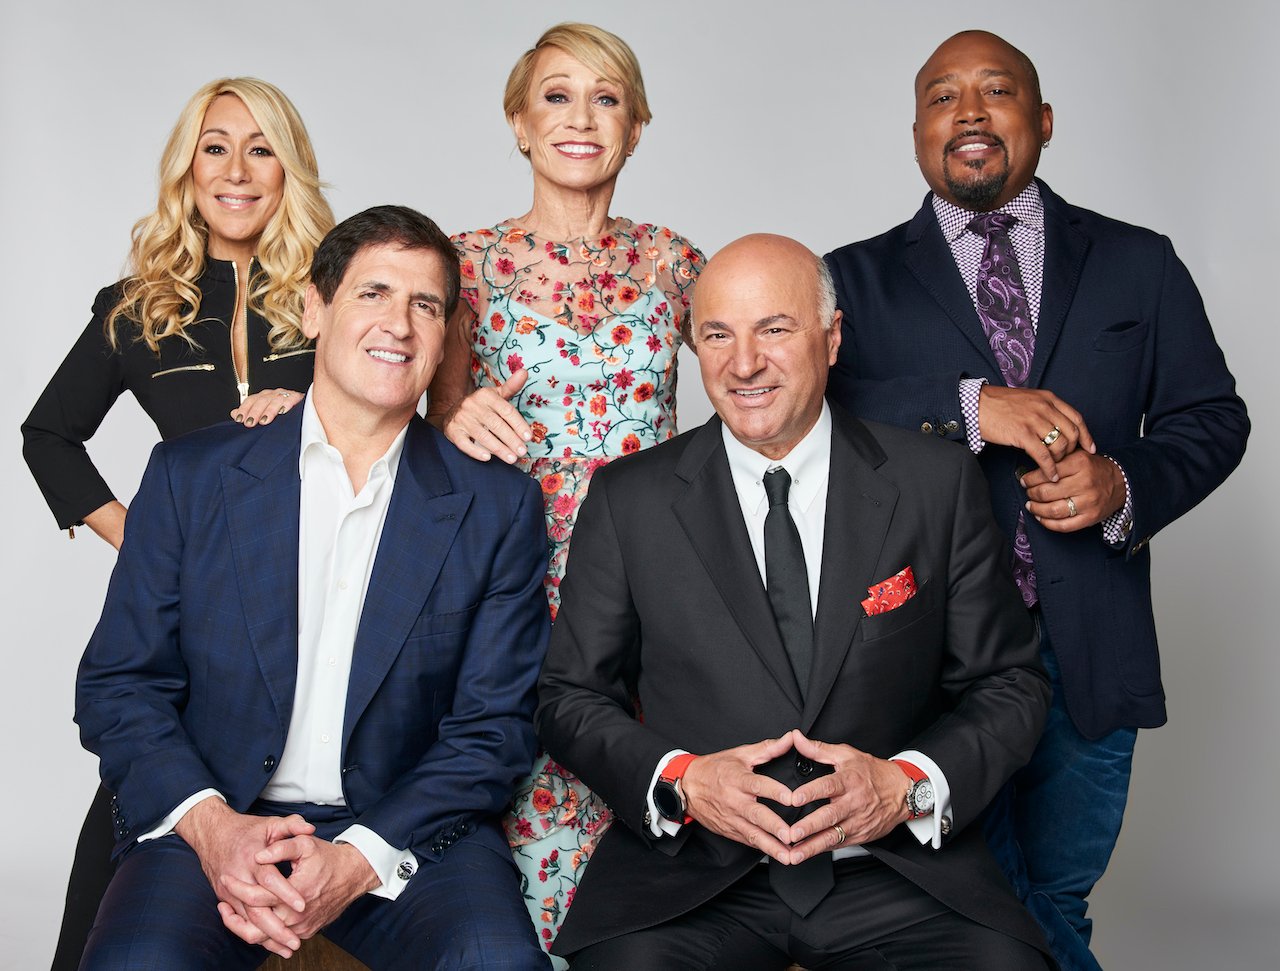 Cast of 'Shark Tank': (l-r) Lori Greiner, Mark Cuban, Barbara Corcoran, Kevin O’Leary, and Daymond John of Tribeca Talks: Ten Years of Shark Tank poses for a portrait during the 2018 Tribeca TV Festival